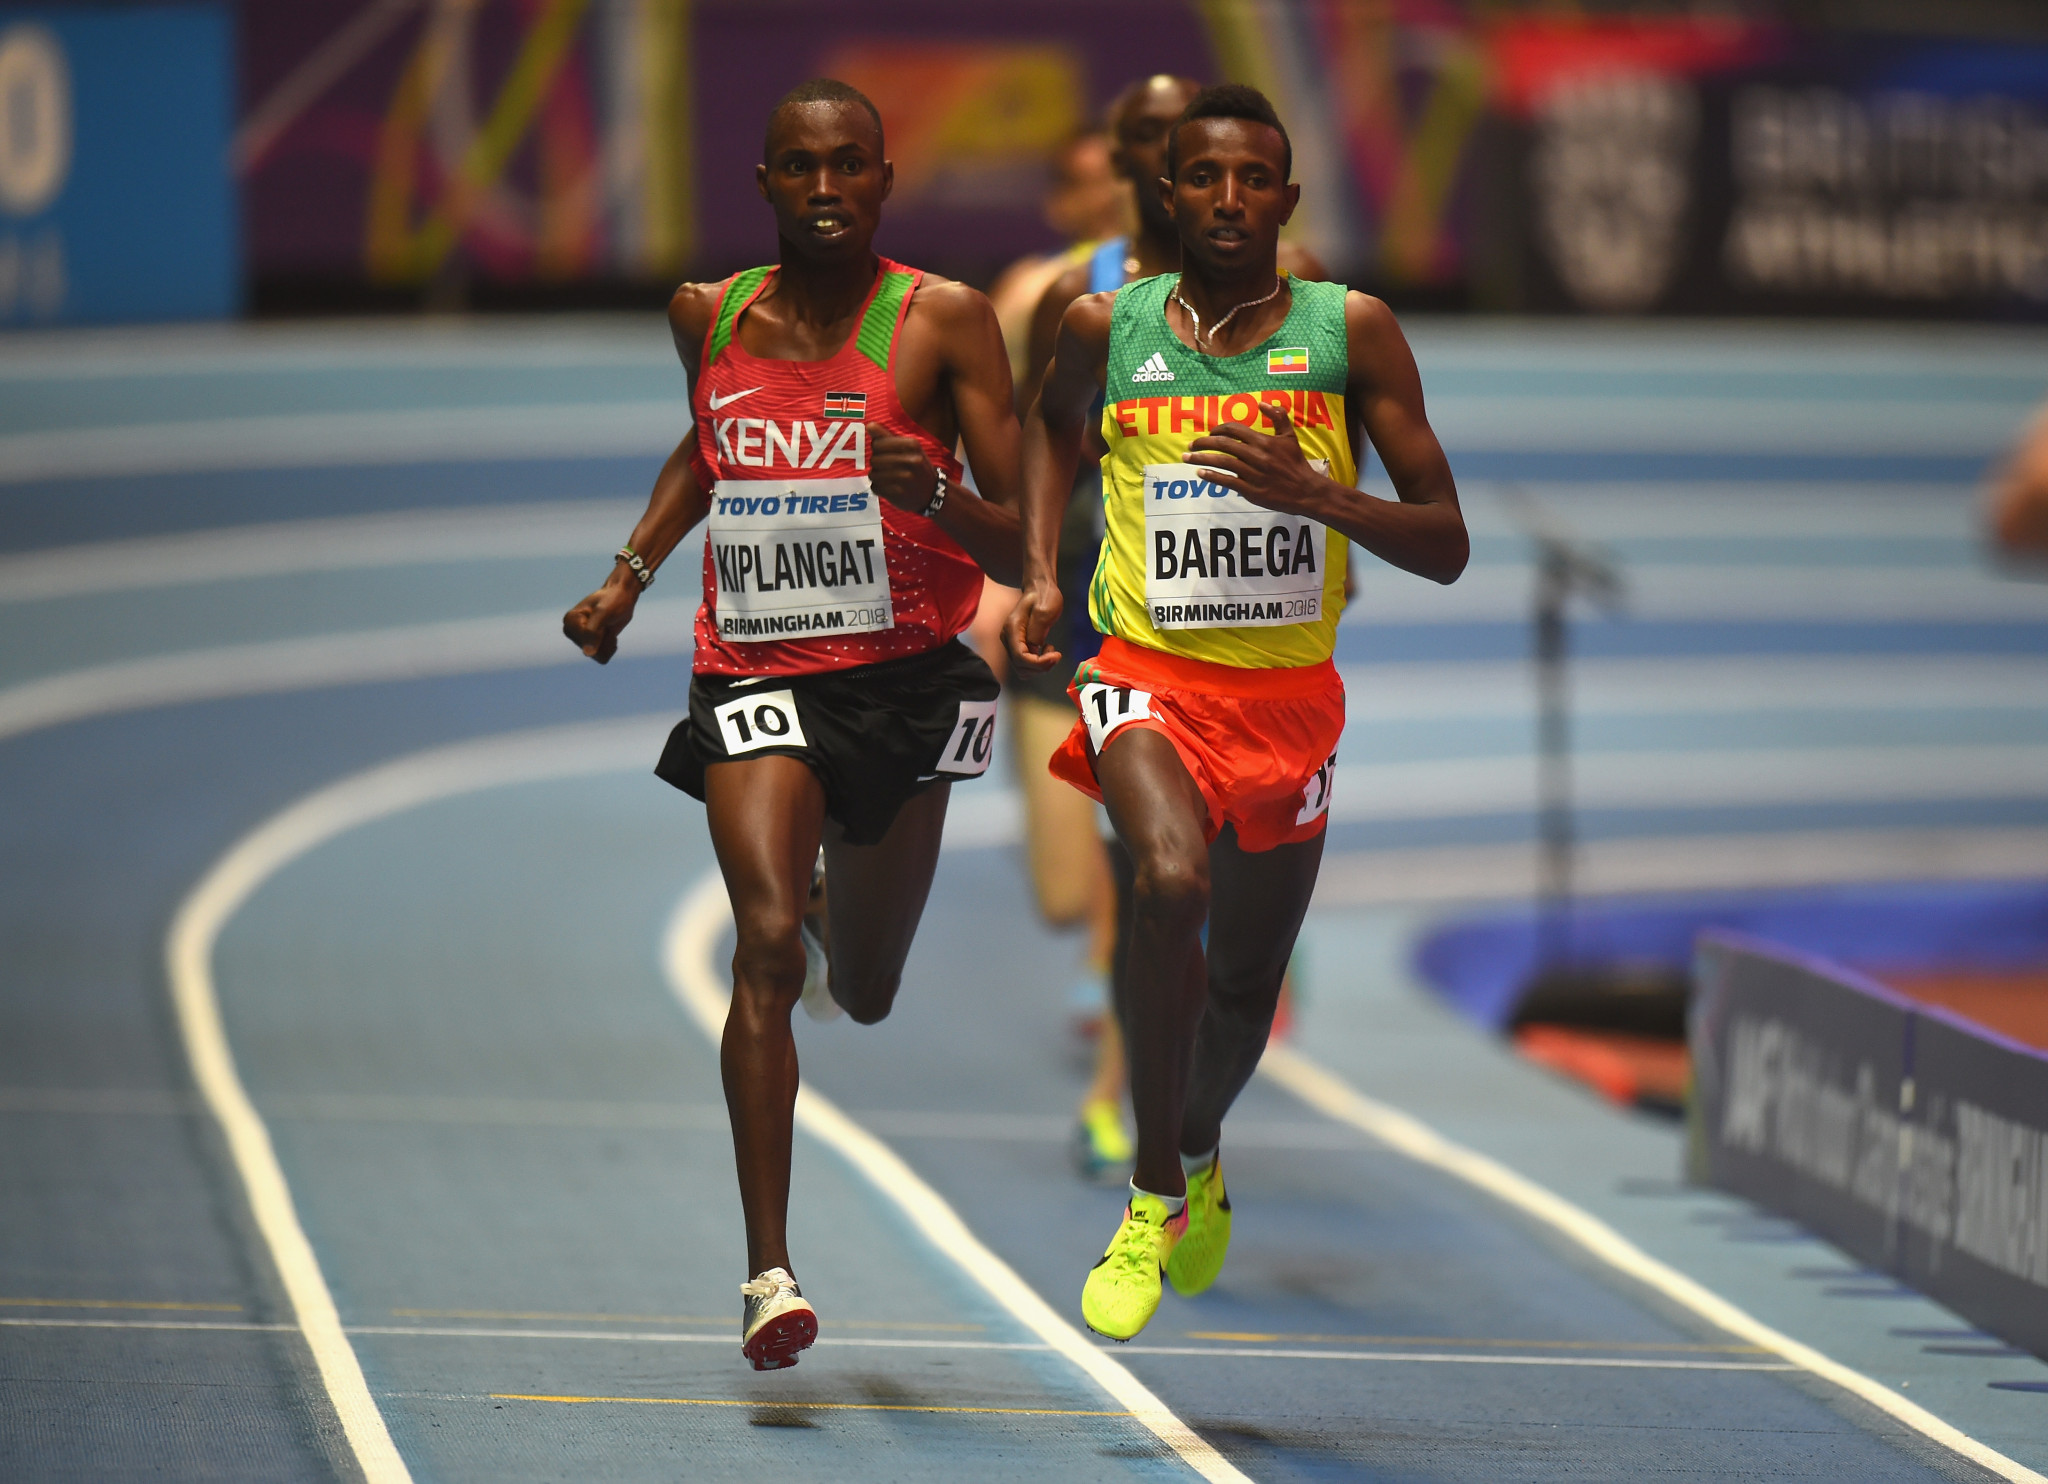   Selemon Barega, on the right, is among the best athletes put in competition © IAAF 